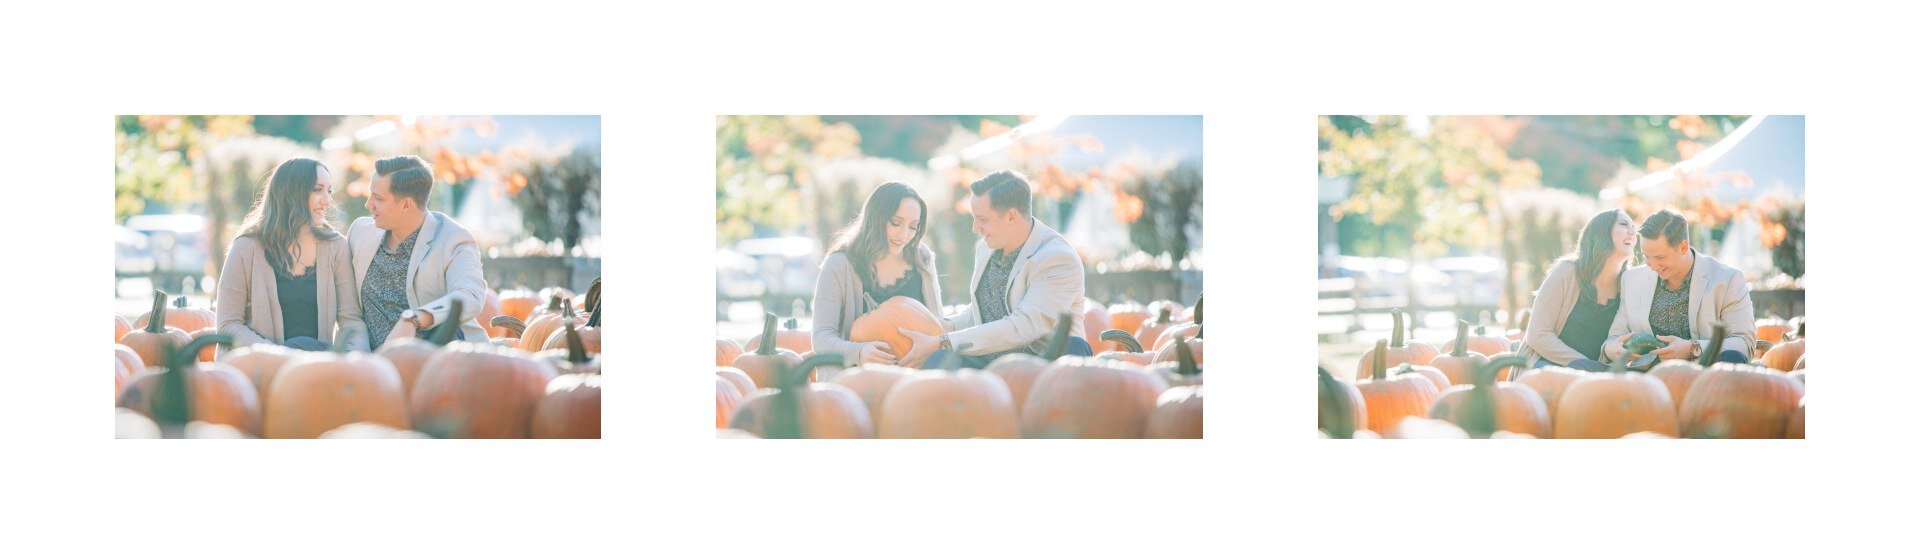 Cleveland Fall Engagement Photos at Patterson Fall Festival 8.jpg